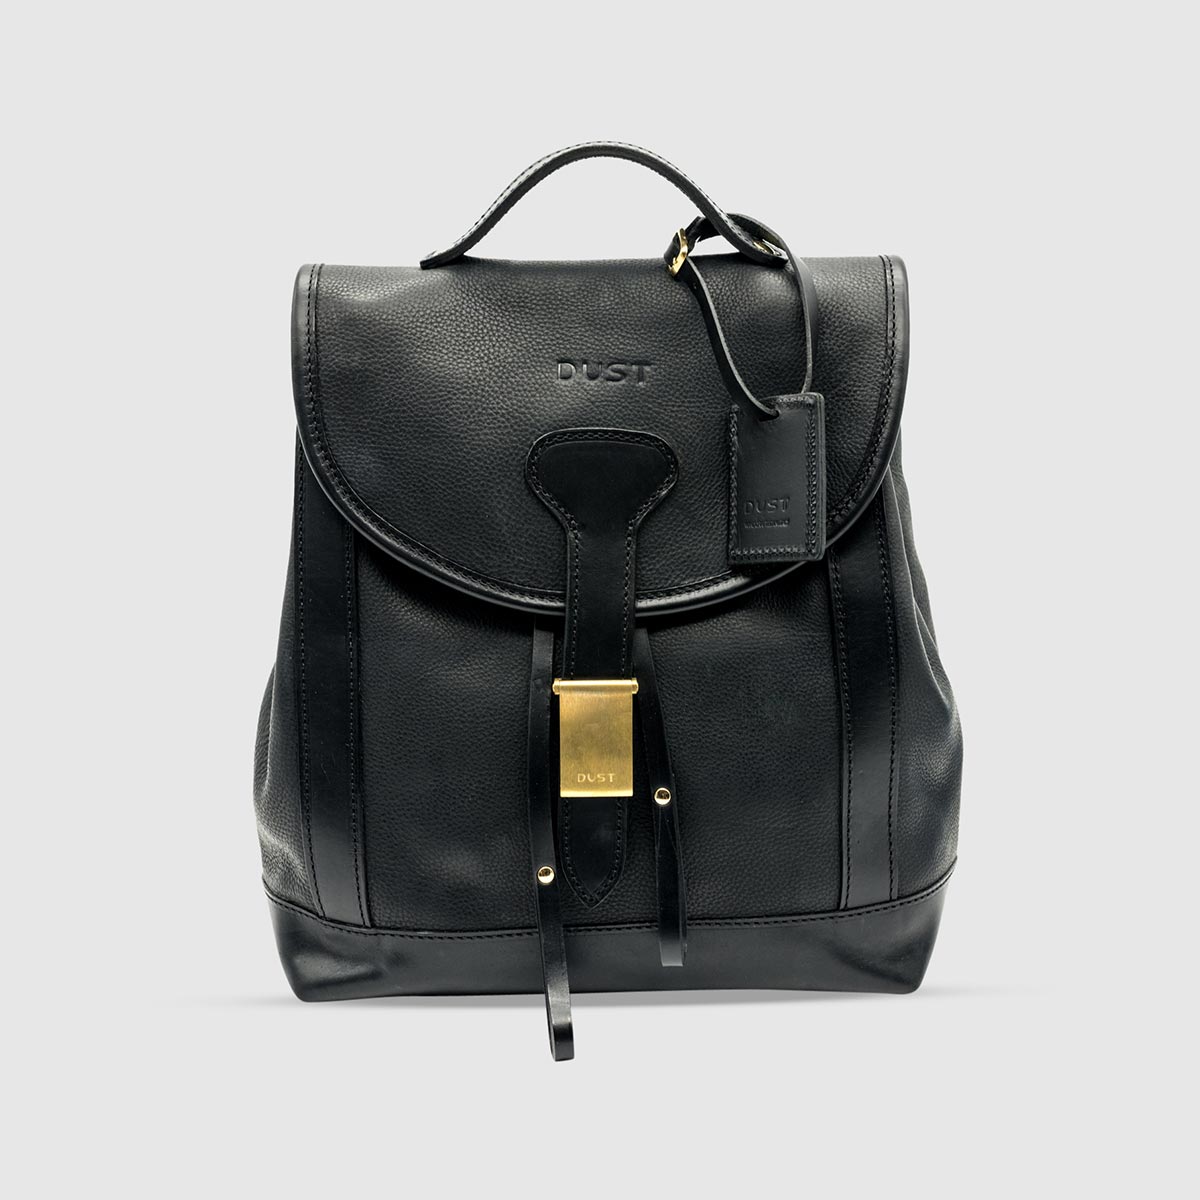 Vegetable Tumbled Leather Backpack – Black Leather